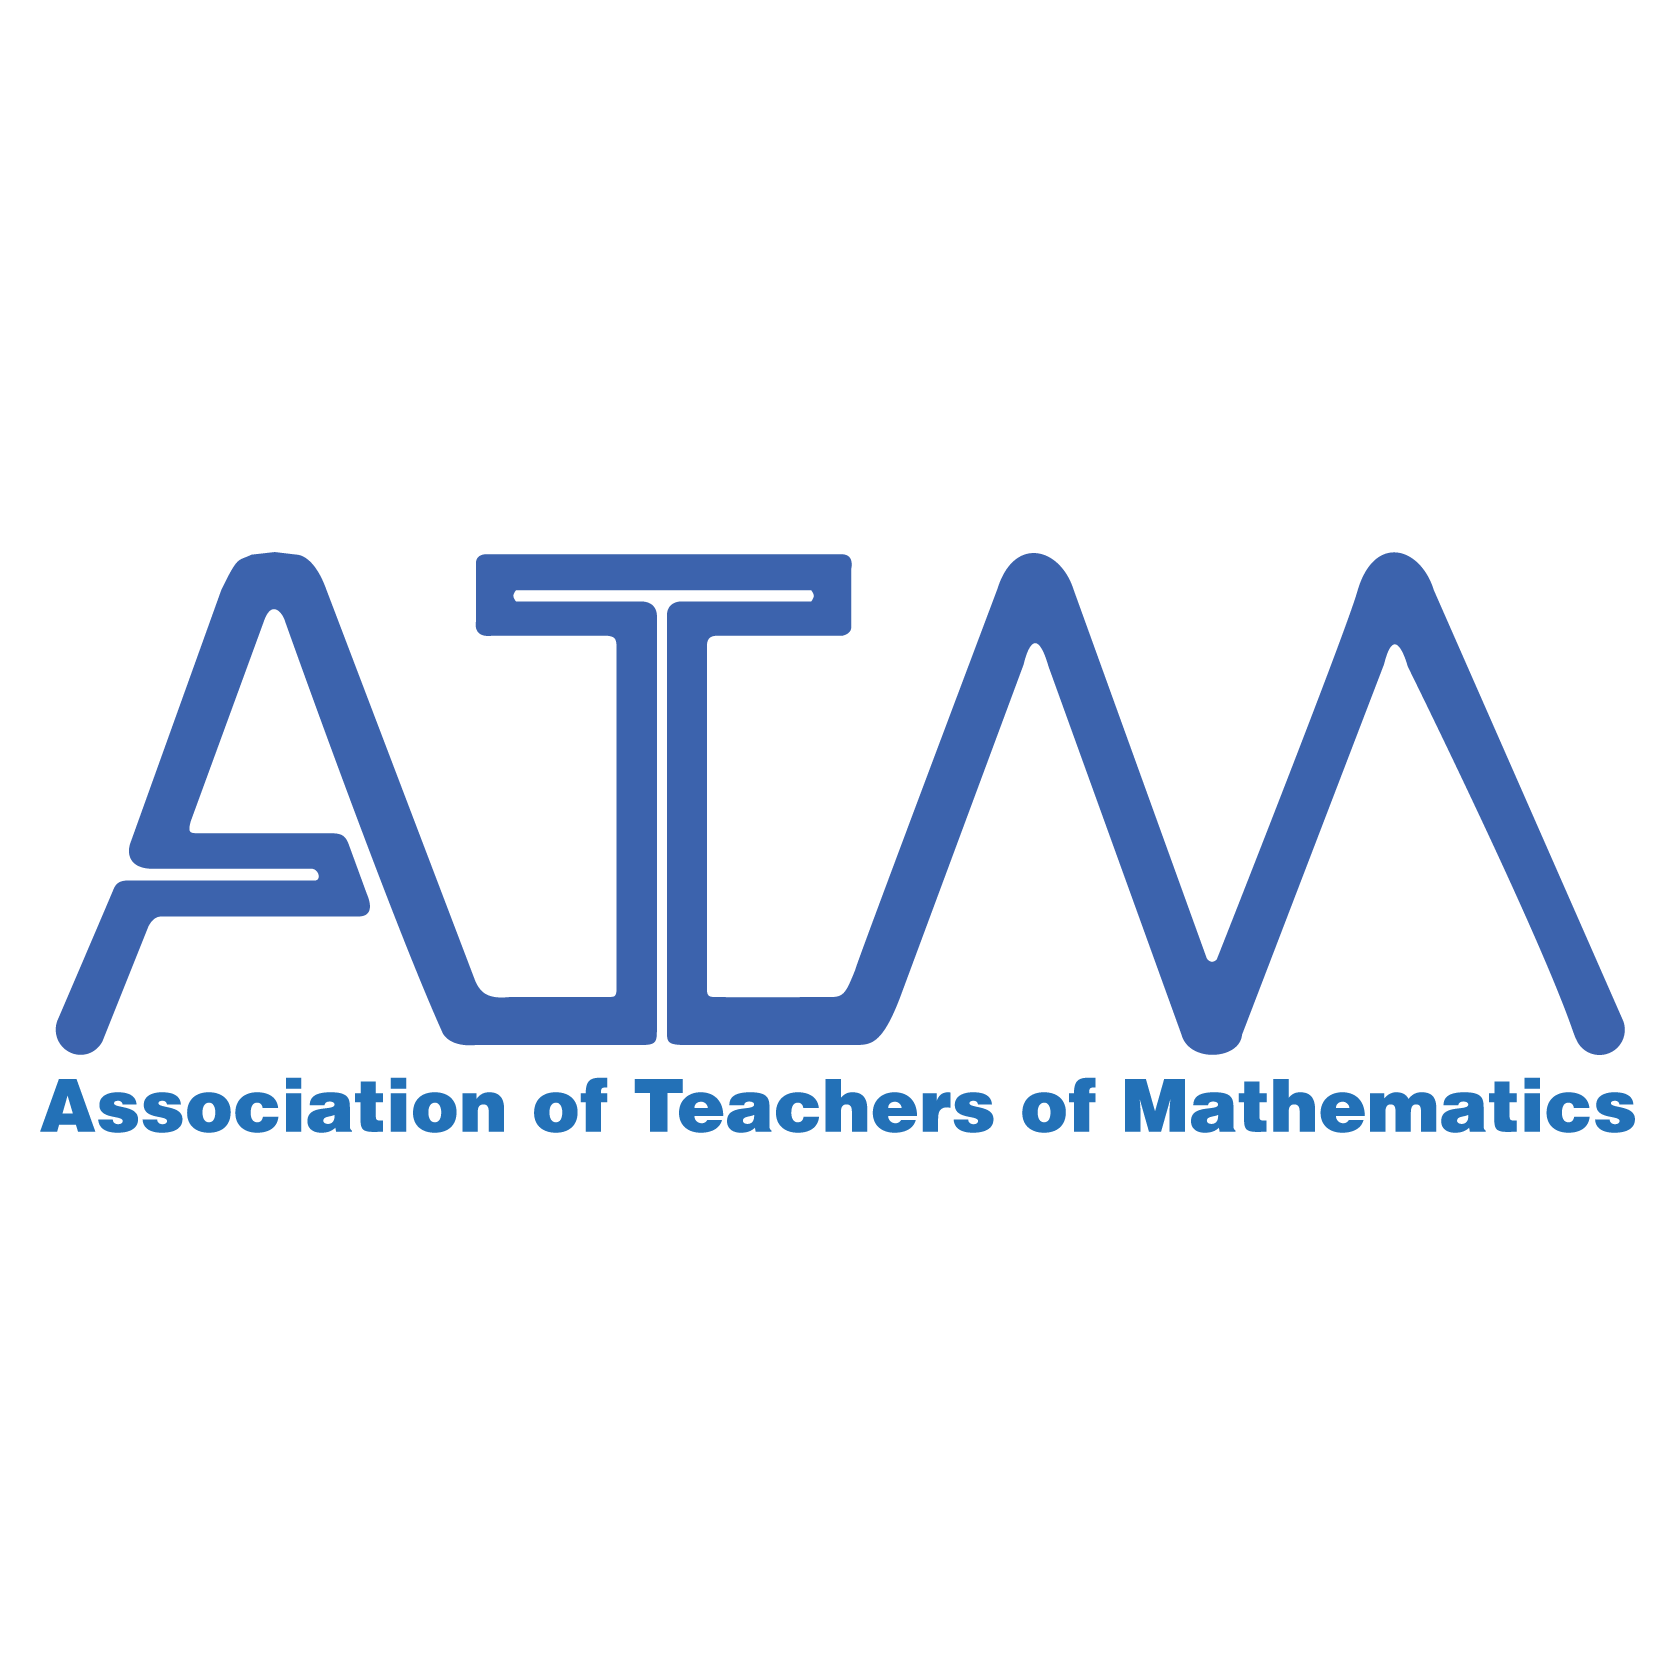 The Association of Teachers of Mathematics (ATM) is independent; supporting educators and parents in providing a rich and stimulating mathematics education.